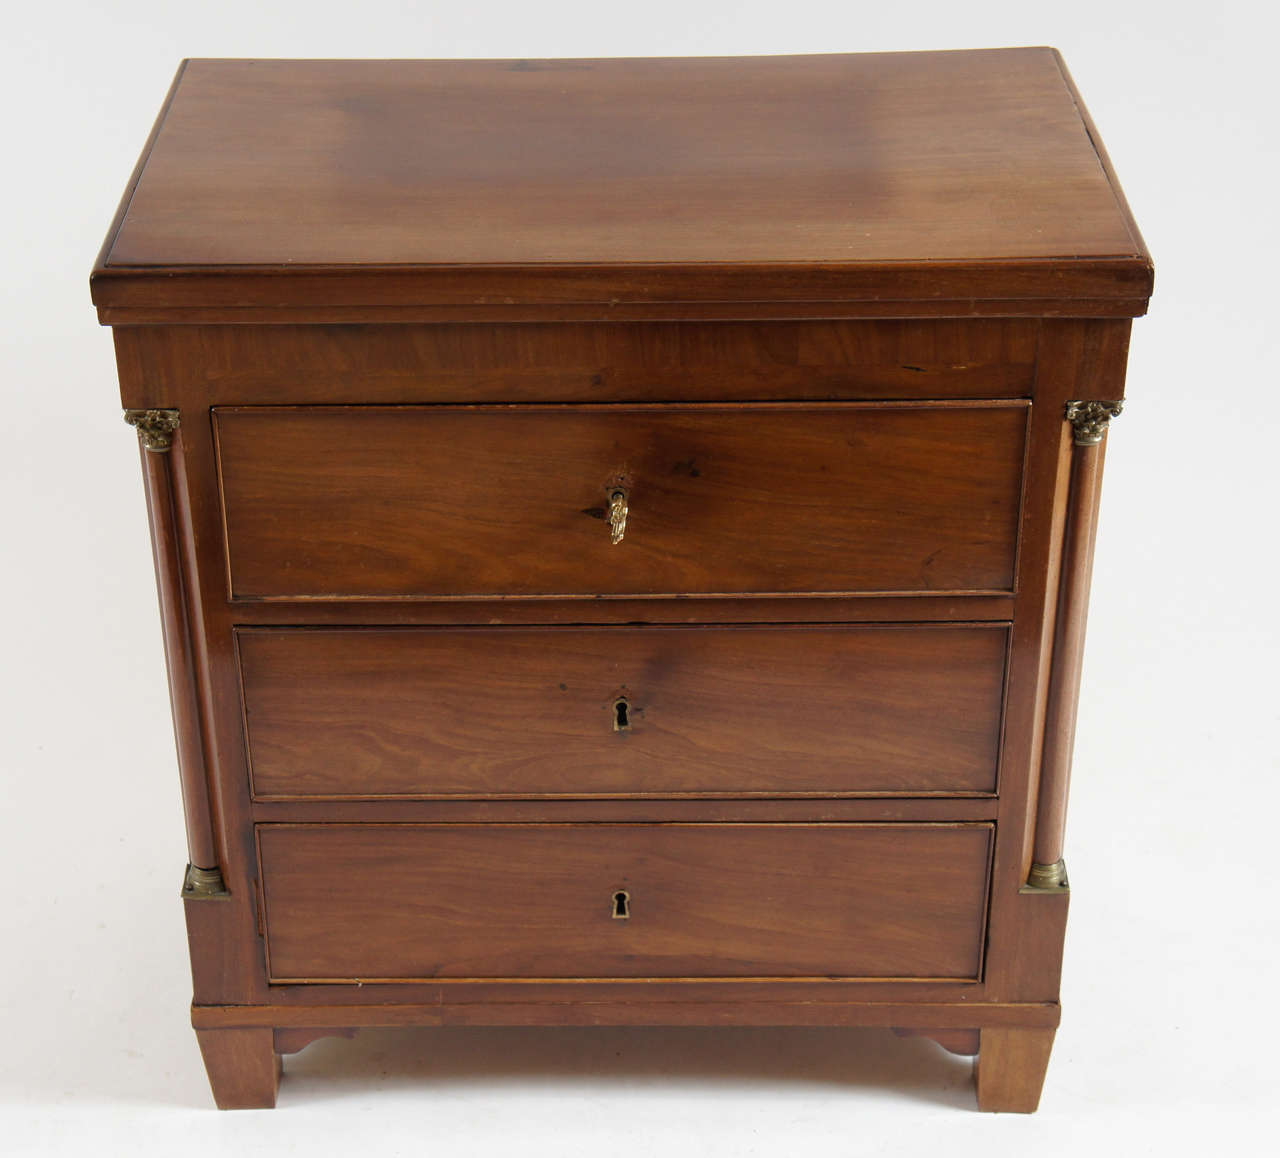 Danish Louis XVI style three-drawer mahogany commode or chest of architectural form having engaged corner colonettes with lost wax cast gilt bronze Corinthian capitals and bases, circa 1790. Original working key included.

Additional search terms: 